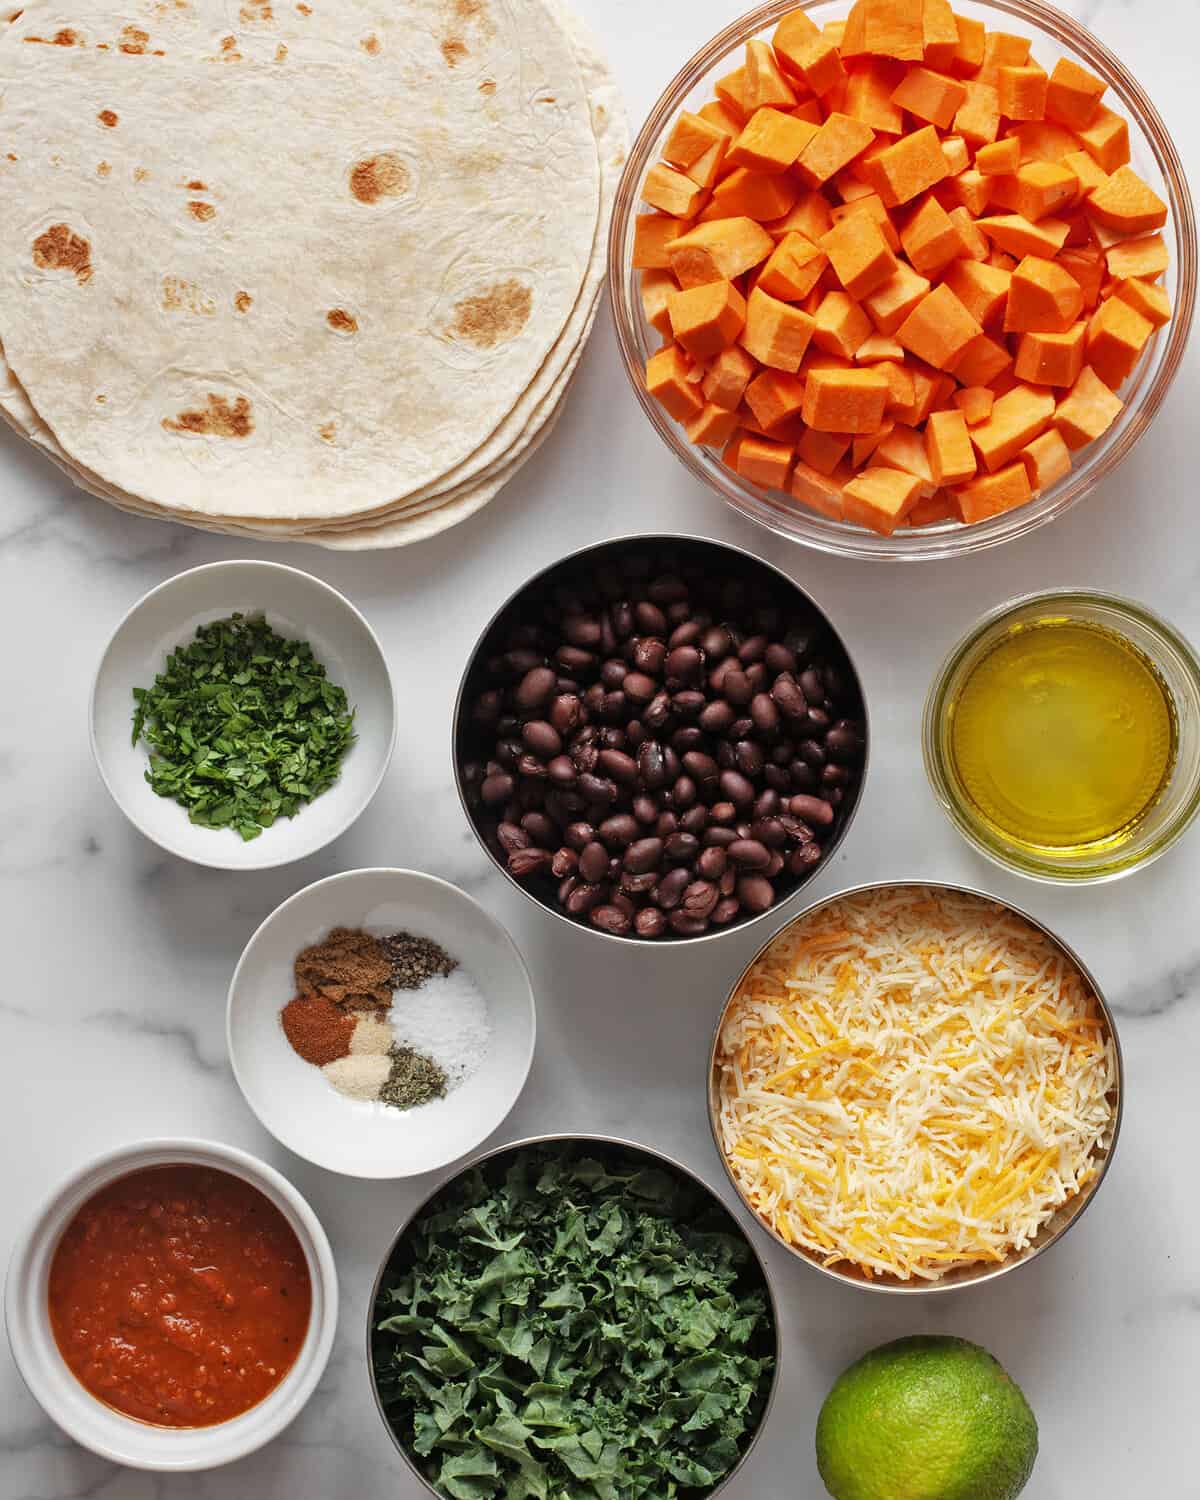 Ingredients including sweet potatoes, black beans, spices. tortillas, cheese, oil, cilantro, kale, salsa and lime.